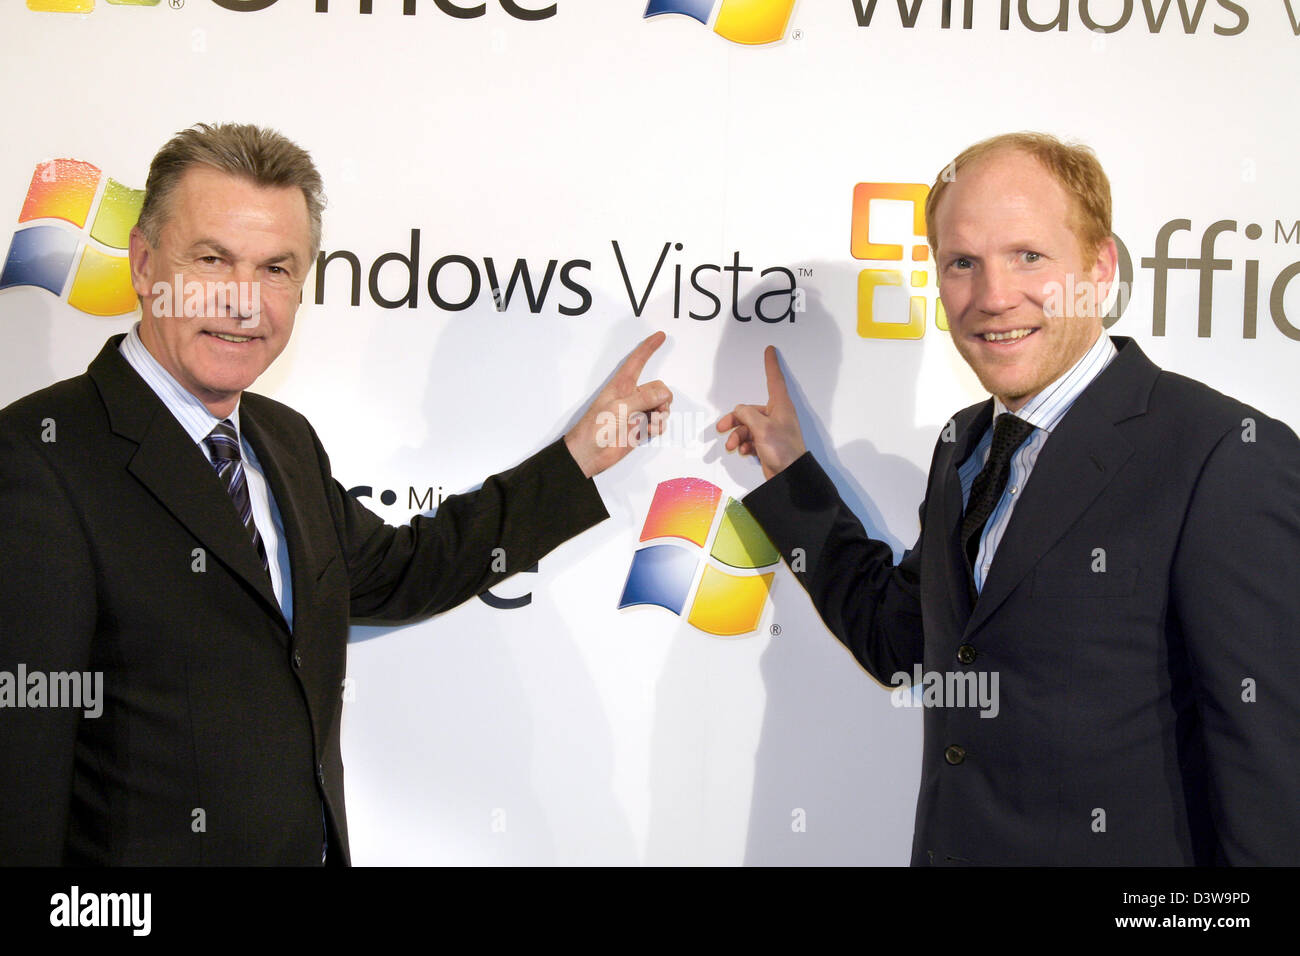 Swiss football coach Ottmar Hitzfeld (L) and German Football Association (DFB) sporting director Matthias Sammer (R) pictured at the launch of Microsoft Windows Vista in Munich, Germany, Monda,y 29 January 2007. The operating system is on sale in 70 countries. Photo: Ursula Dueren Stock Photo